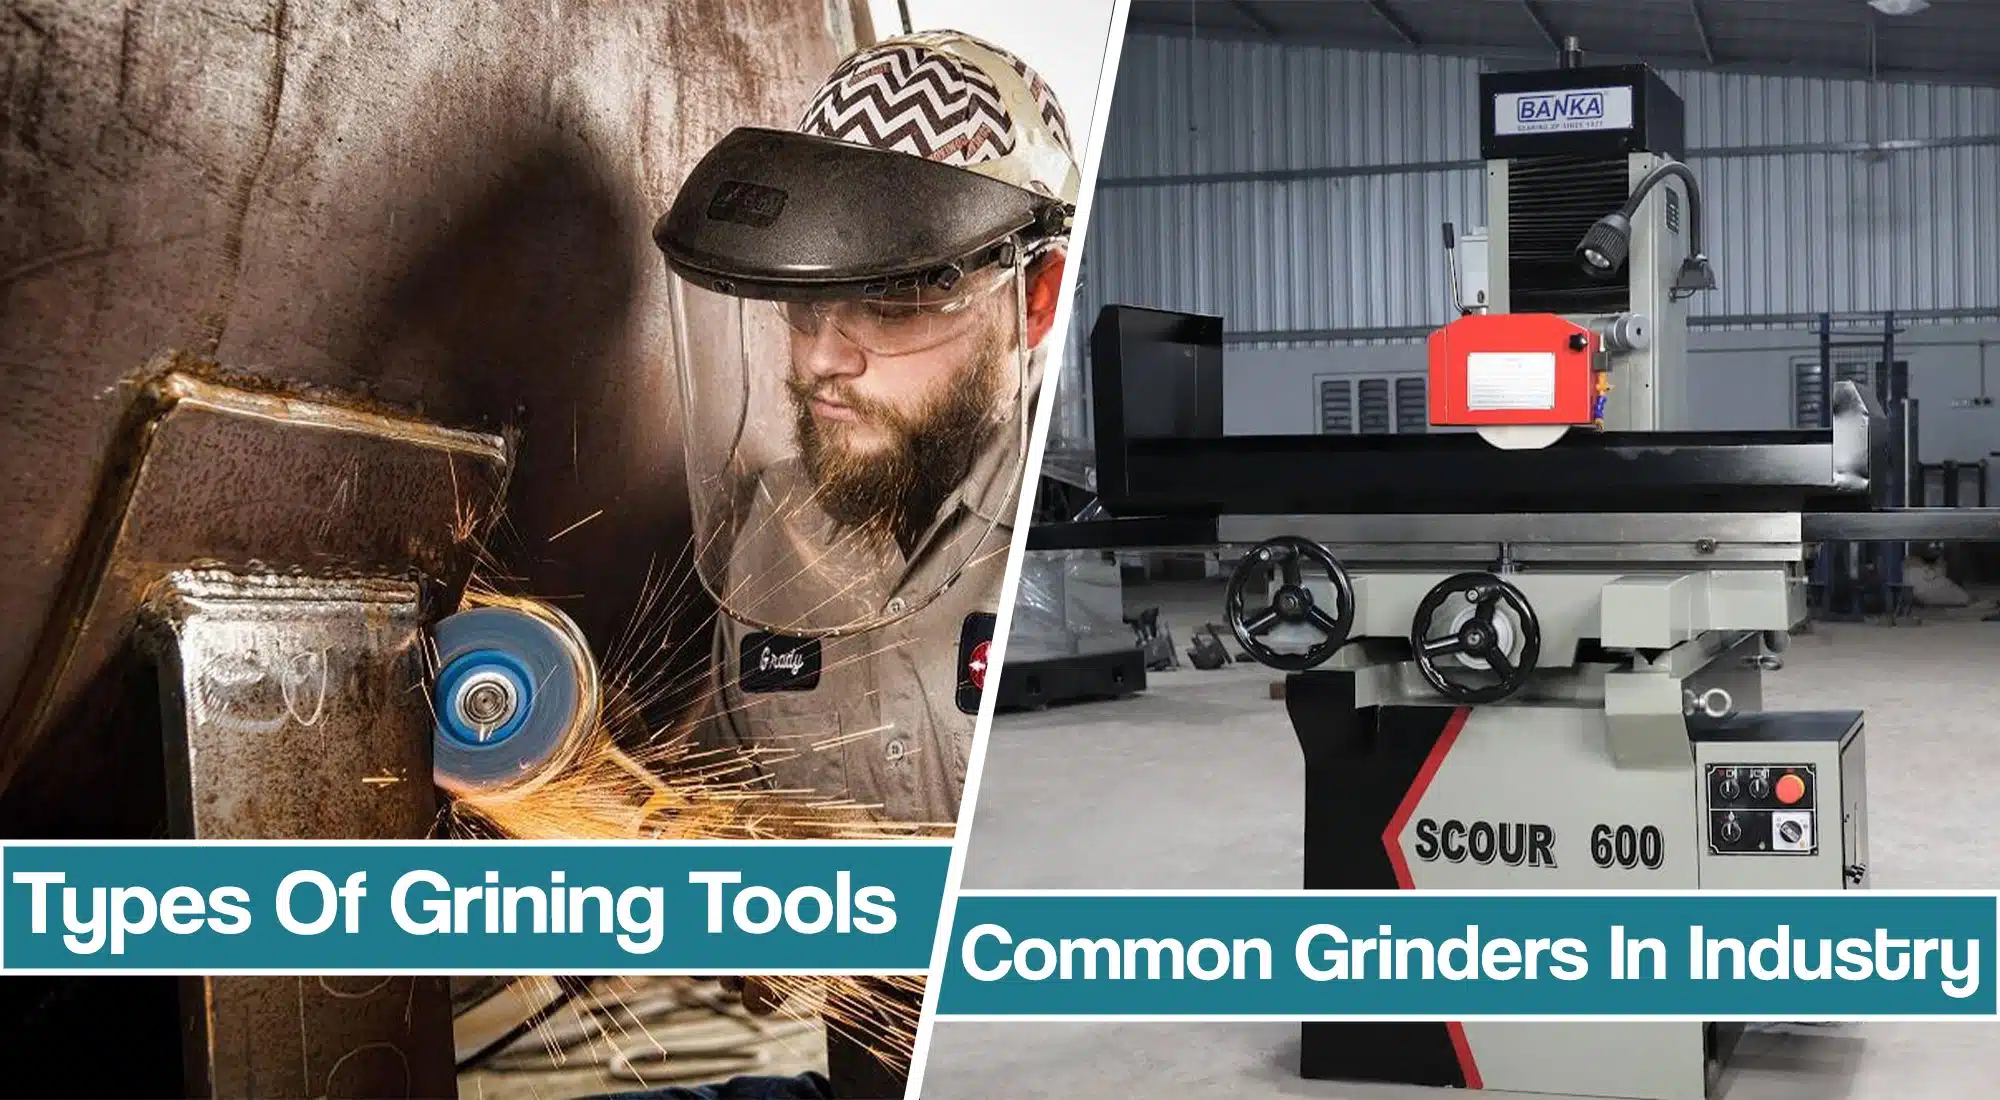 Types Of Grinding Tools Explained